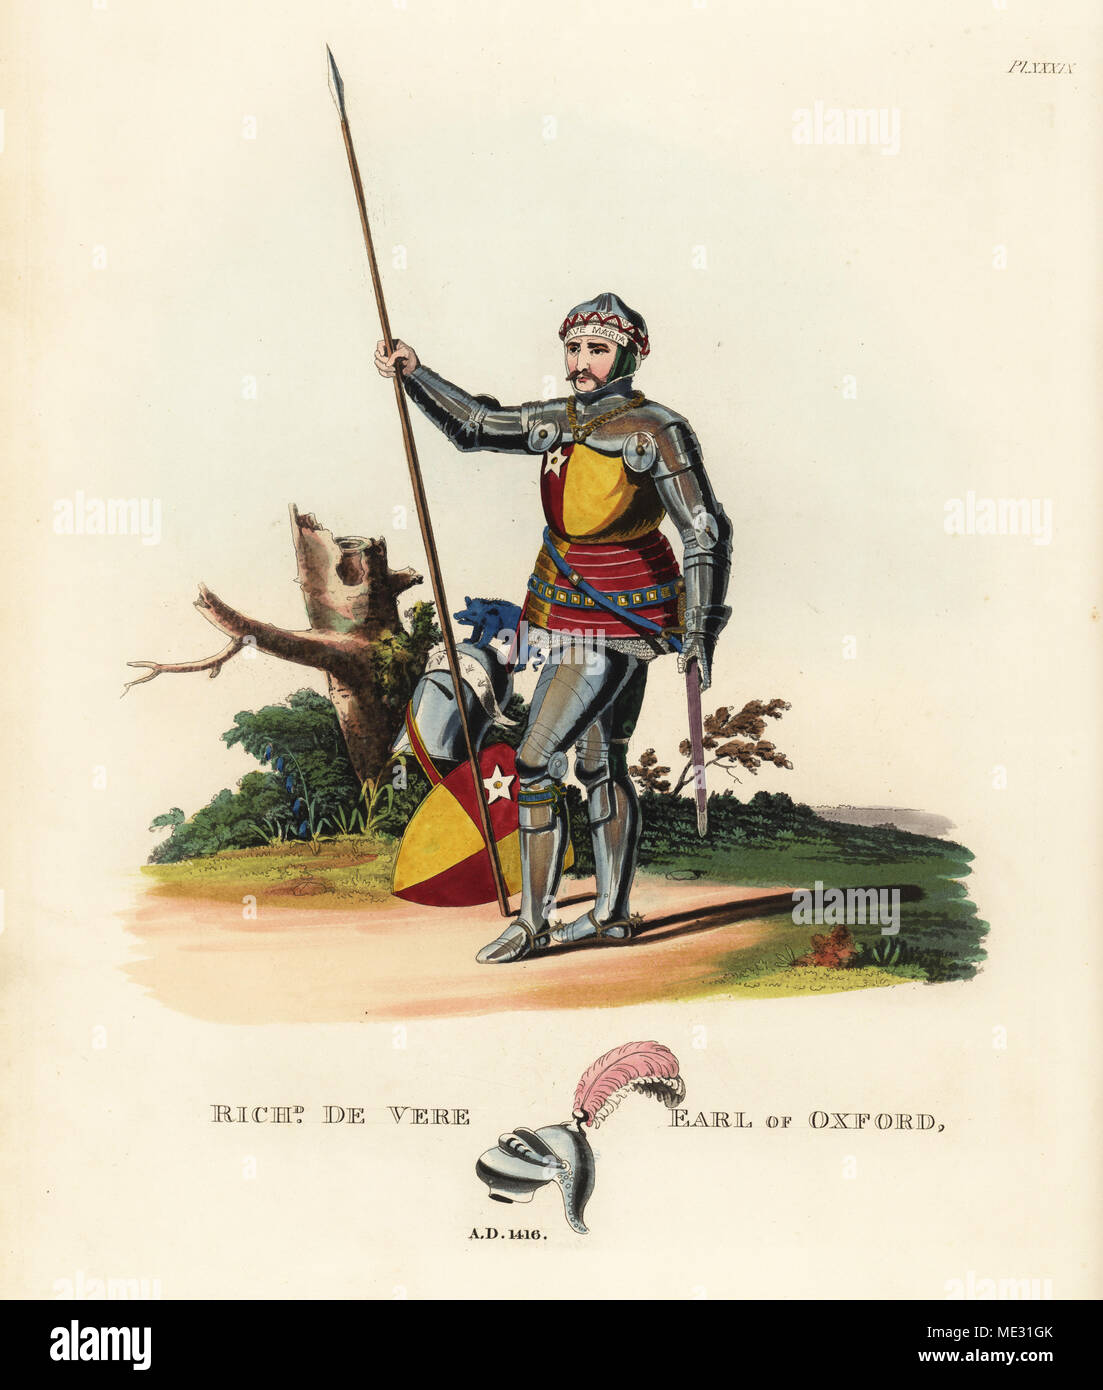 Richard de Vere, 11th Earl of Oxford, 1416, commander at the Battle of Agincourt. He wears a suit of armour with small pallettes, bassinet wreath and inscription on the forehead plate. Tilting helmet and shield with coat of arms (quarterly gules and or; a mullet argent) on the ground. Handcoloured lithograph by Maddocks after an illustration by S.R. Meyrick from Sir Samuel Rush Meyrick's A Critical Inquiry into Antient Armour, John Dowding, London, 1842. Stock Photo